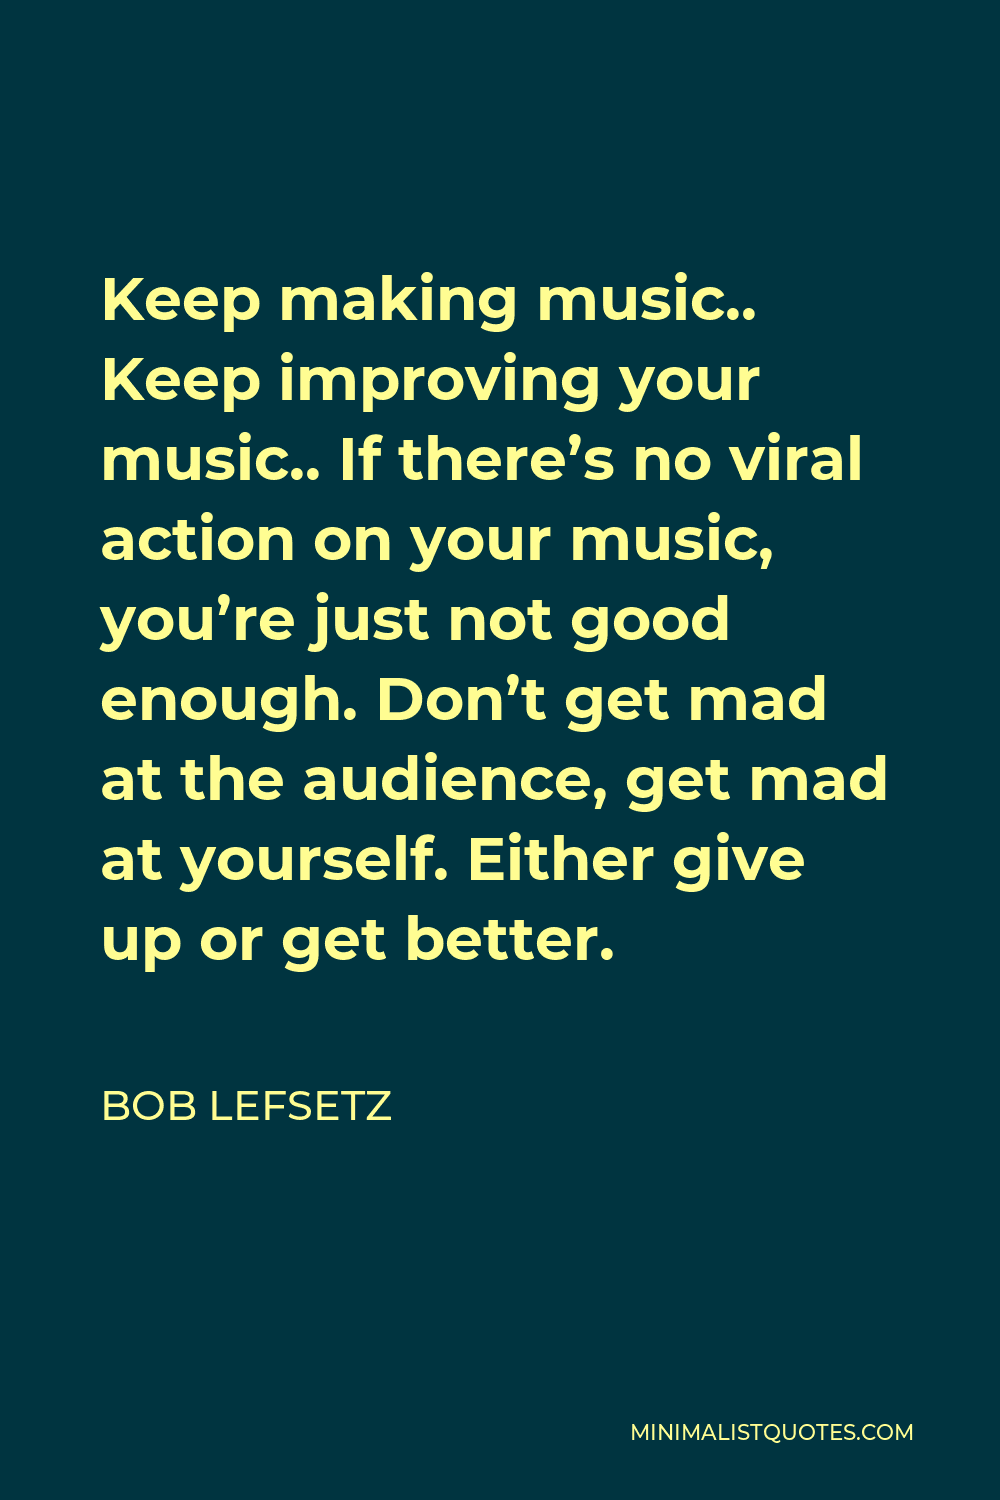 Bob Lefsetz Quote - Keep making music.. Keep improving your music.. If there’s no viral action on your music, you’re just not good enough. Don’t get mad at the audience, get mad at yourself. Either give up or get better.